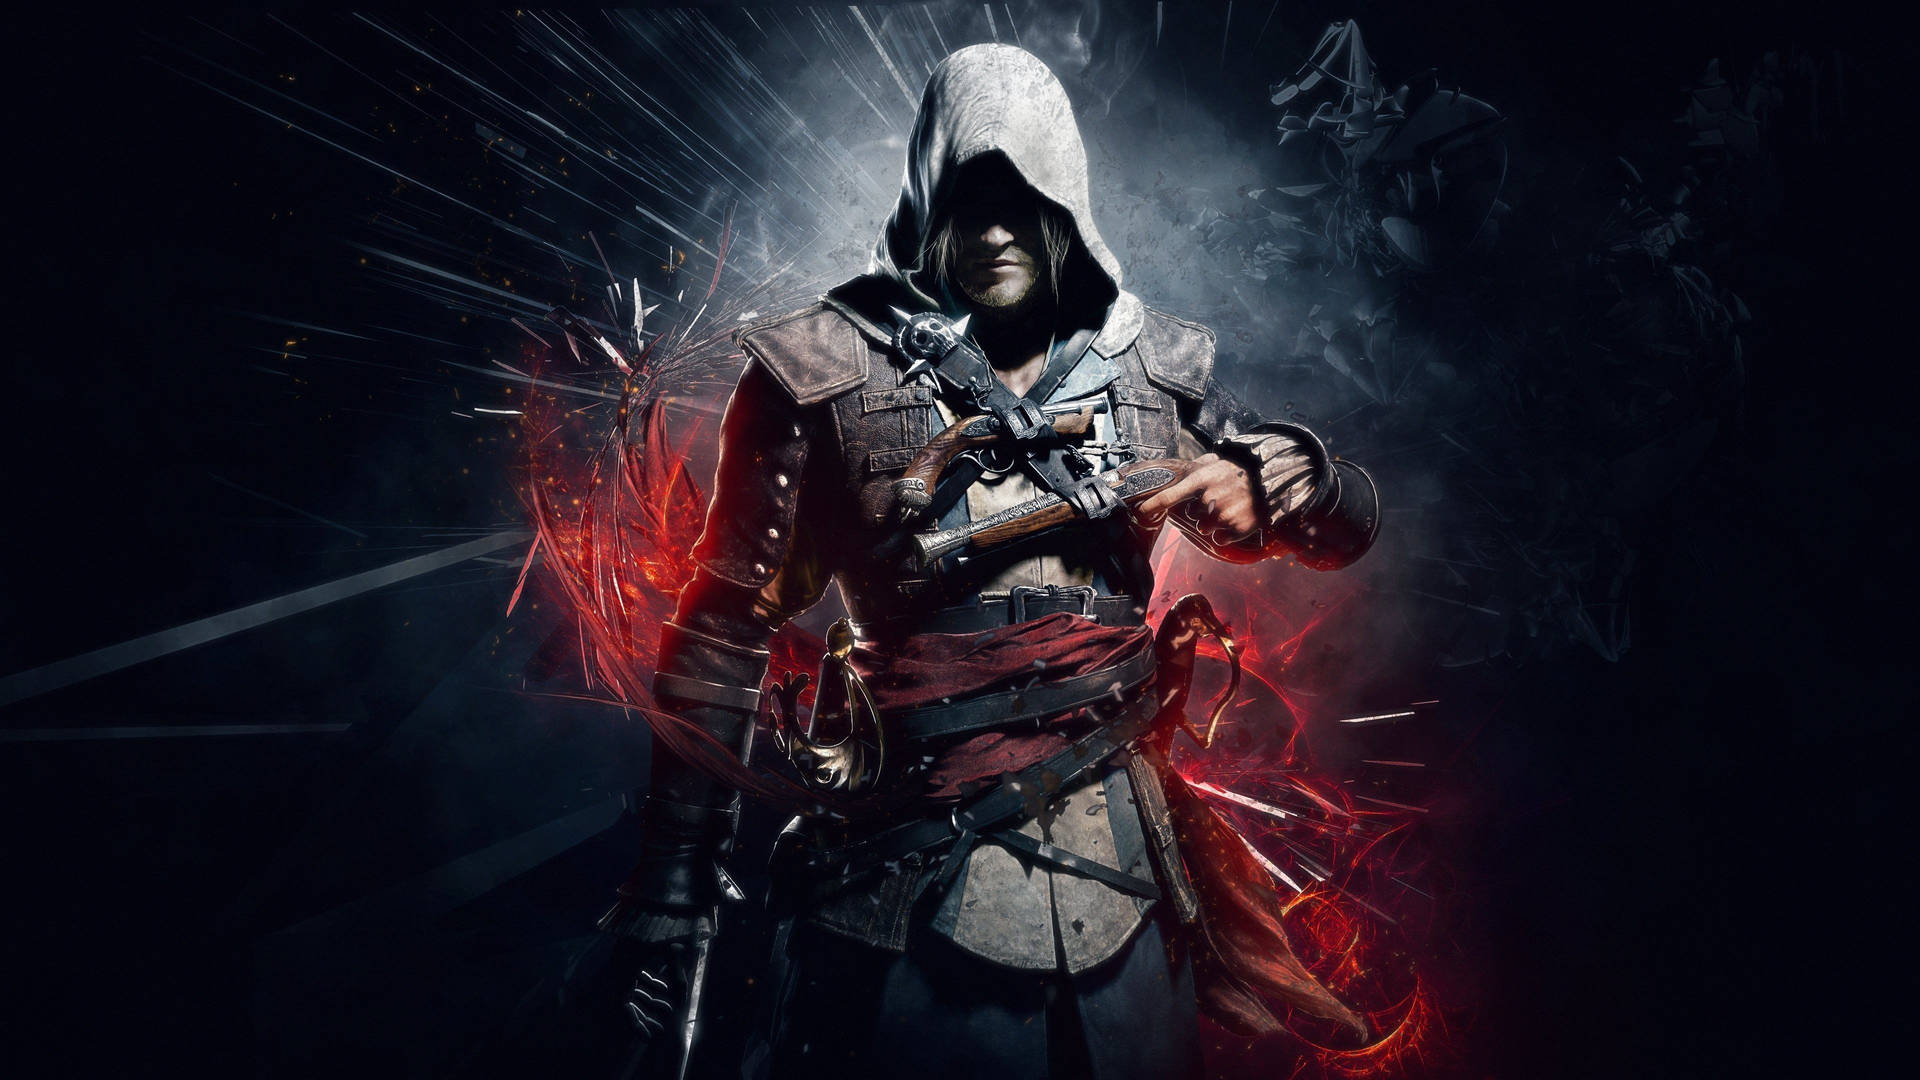 Hd Assassin's Creed Gaming Cover Wallpaper